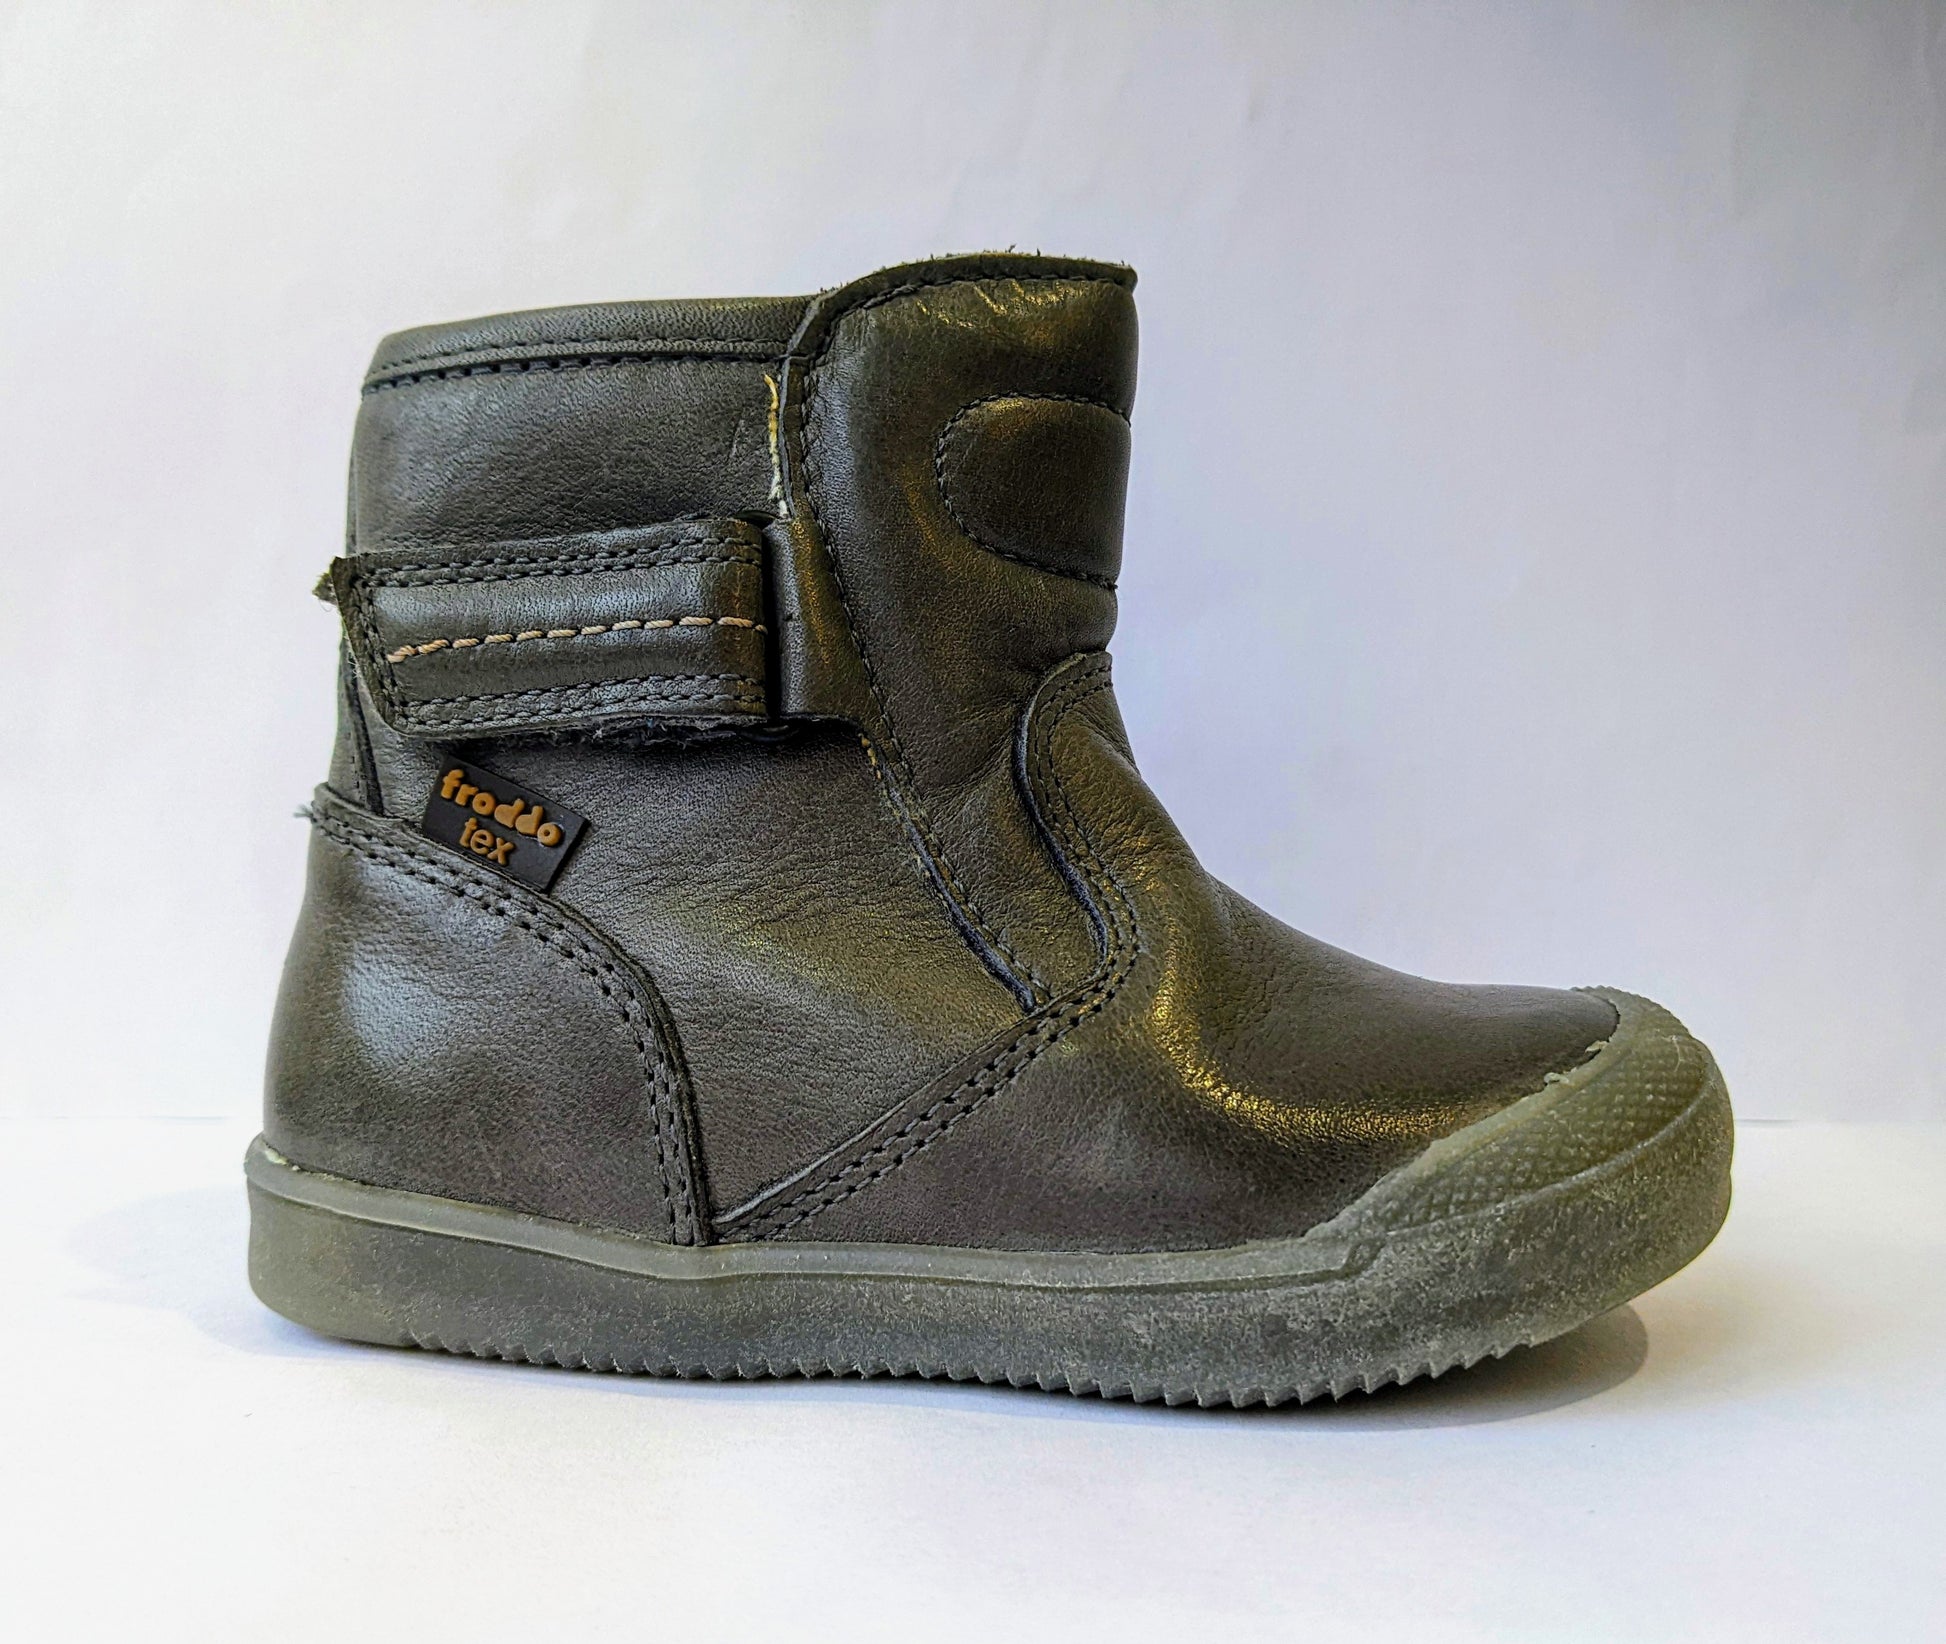 A boys waterproof ankle boot by Froddo, style G2160034-1 , in grey leather with toe bumper. Right side view.